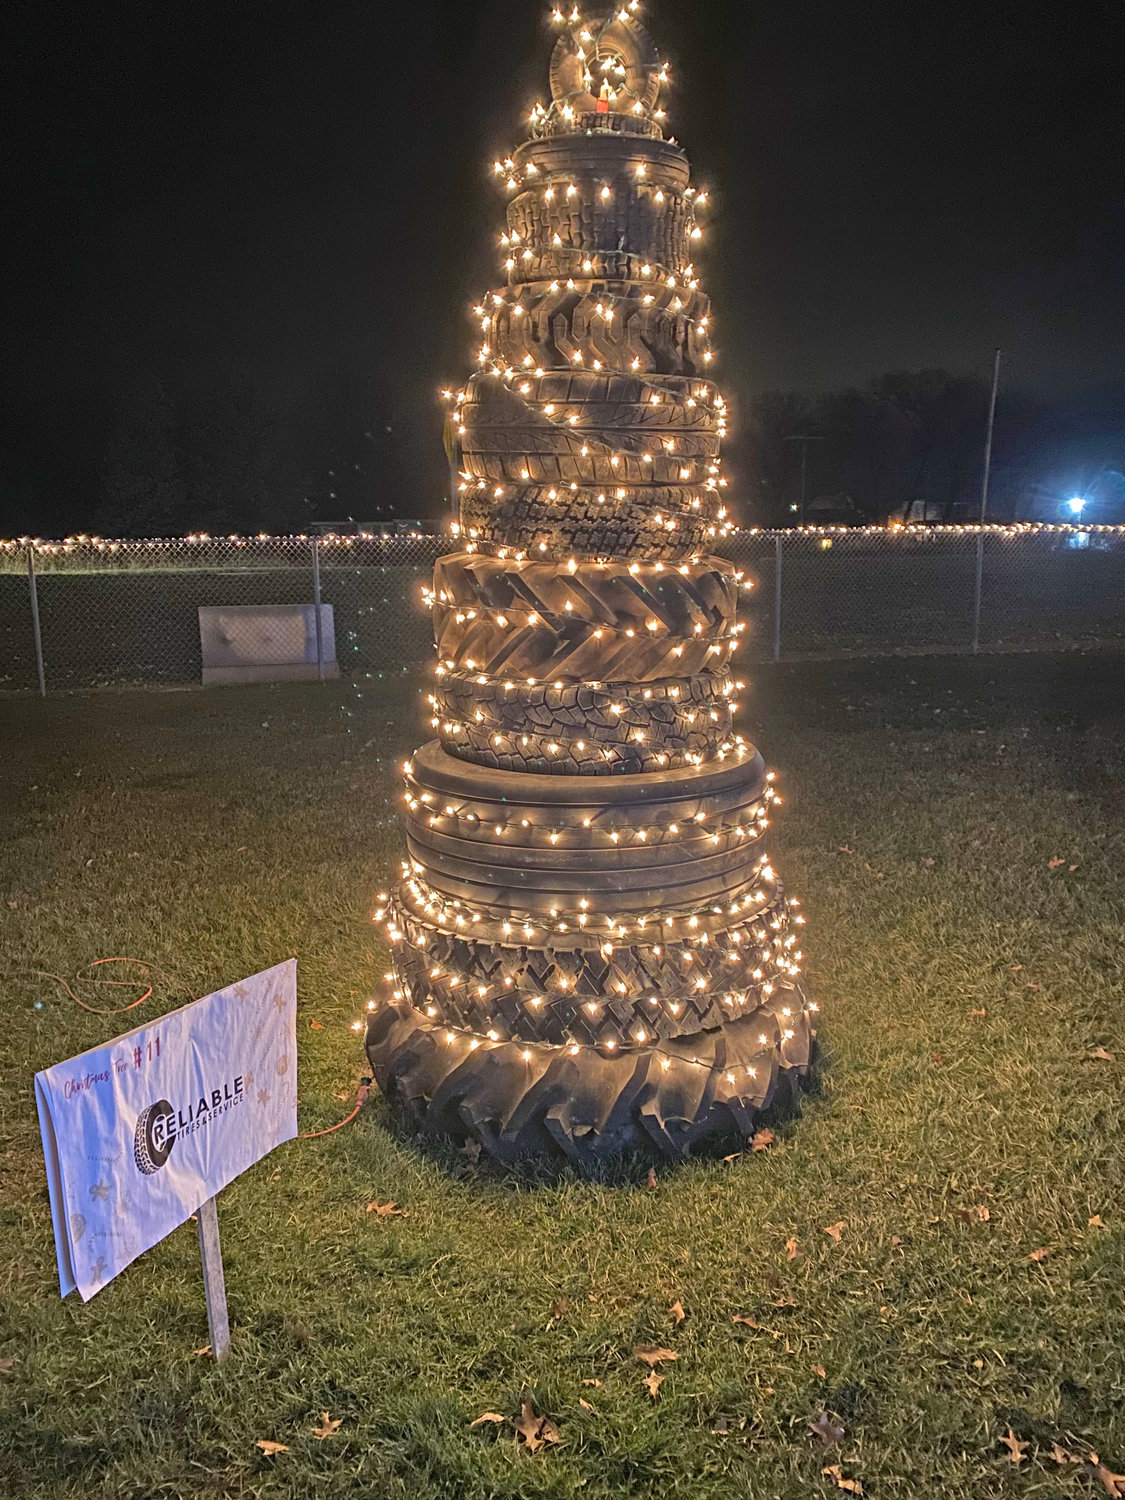 Reliable Tire's Tire Tree won best tree.